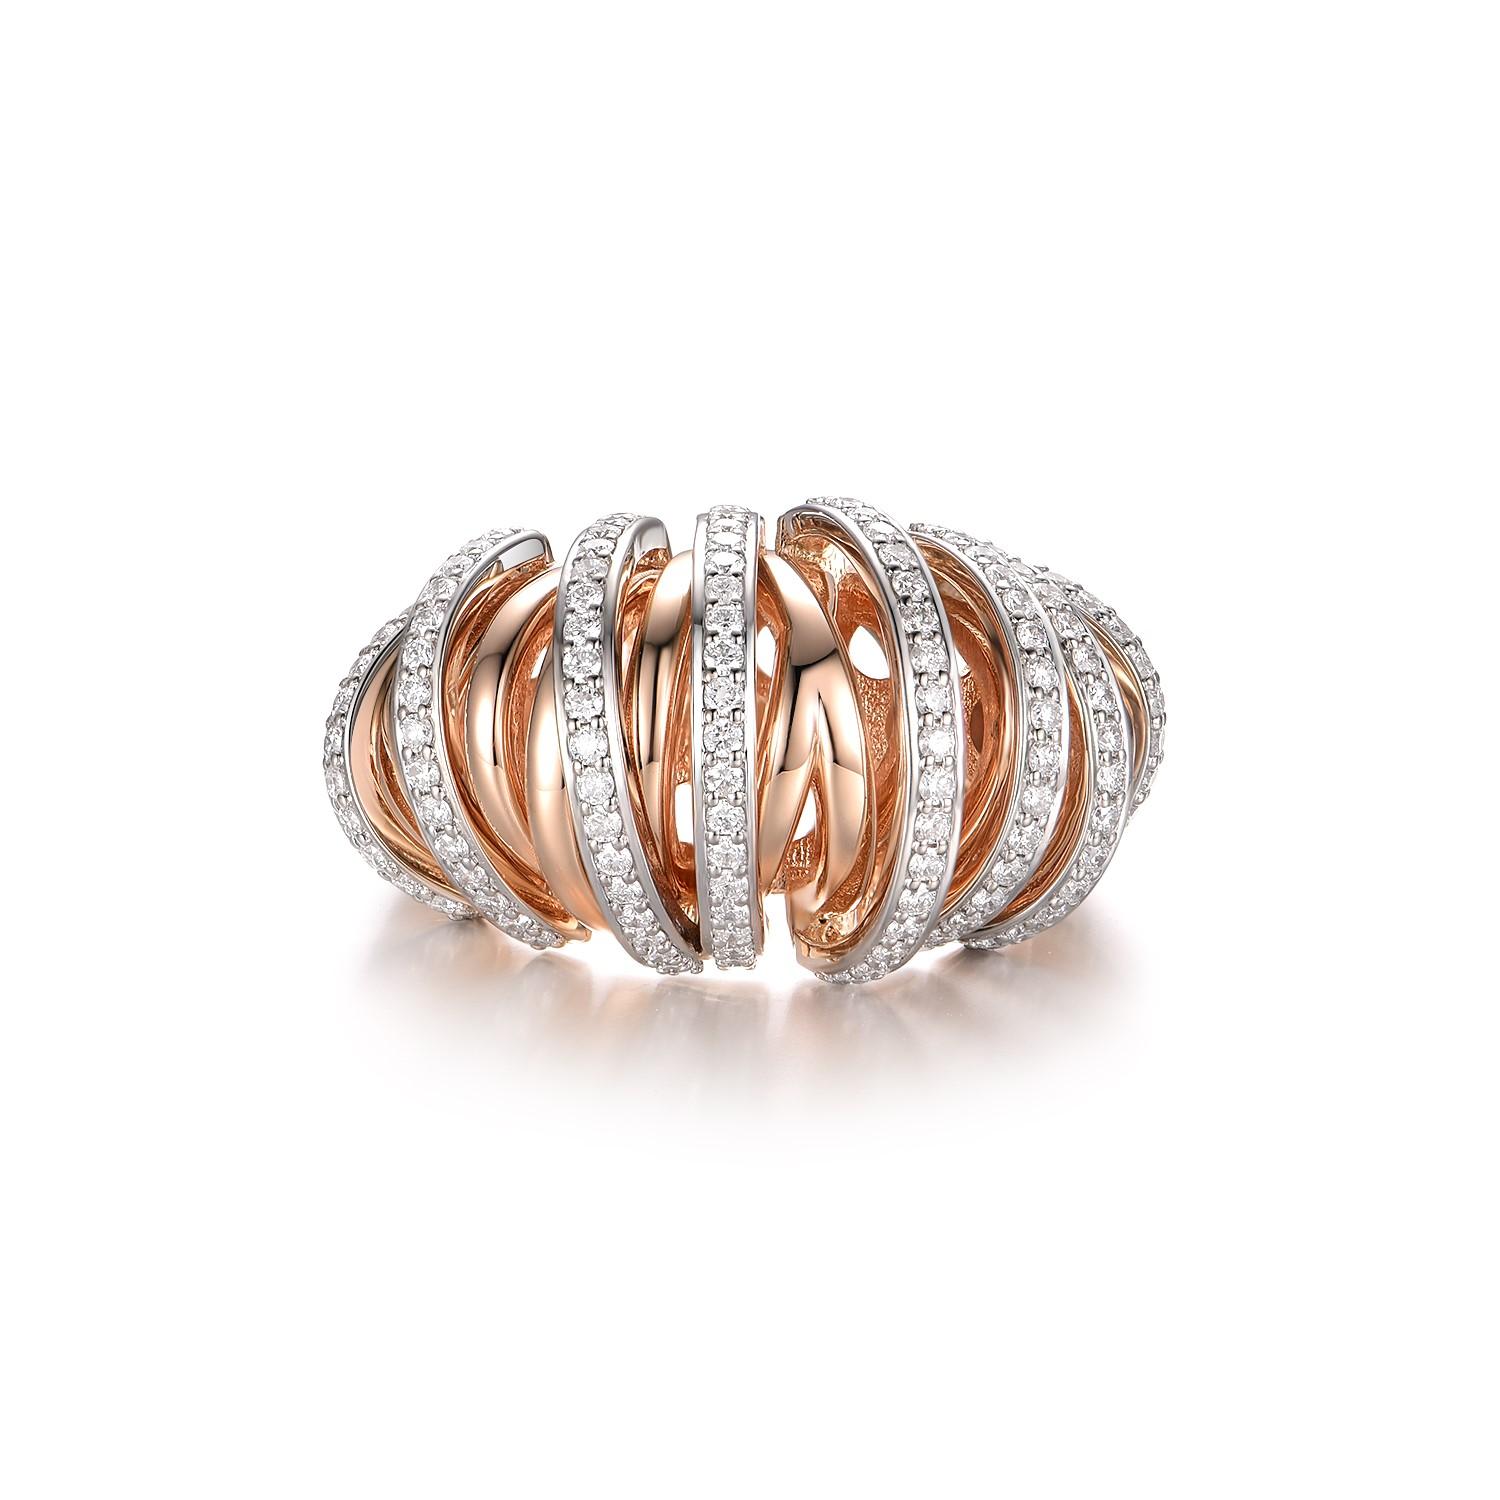 This striking ring is a masterpiece of design, meticulously crafted from the alluring tones of 18K rose gold. It features an intricate pattern of bands that elegantly twist and fold around the finger in a display of expert craftsmanship. Set within